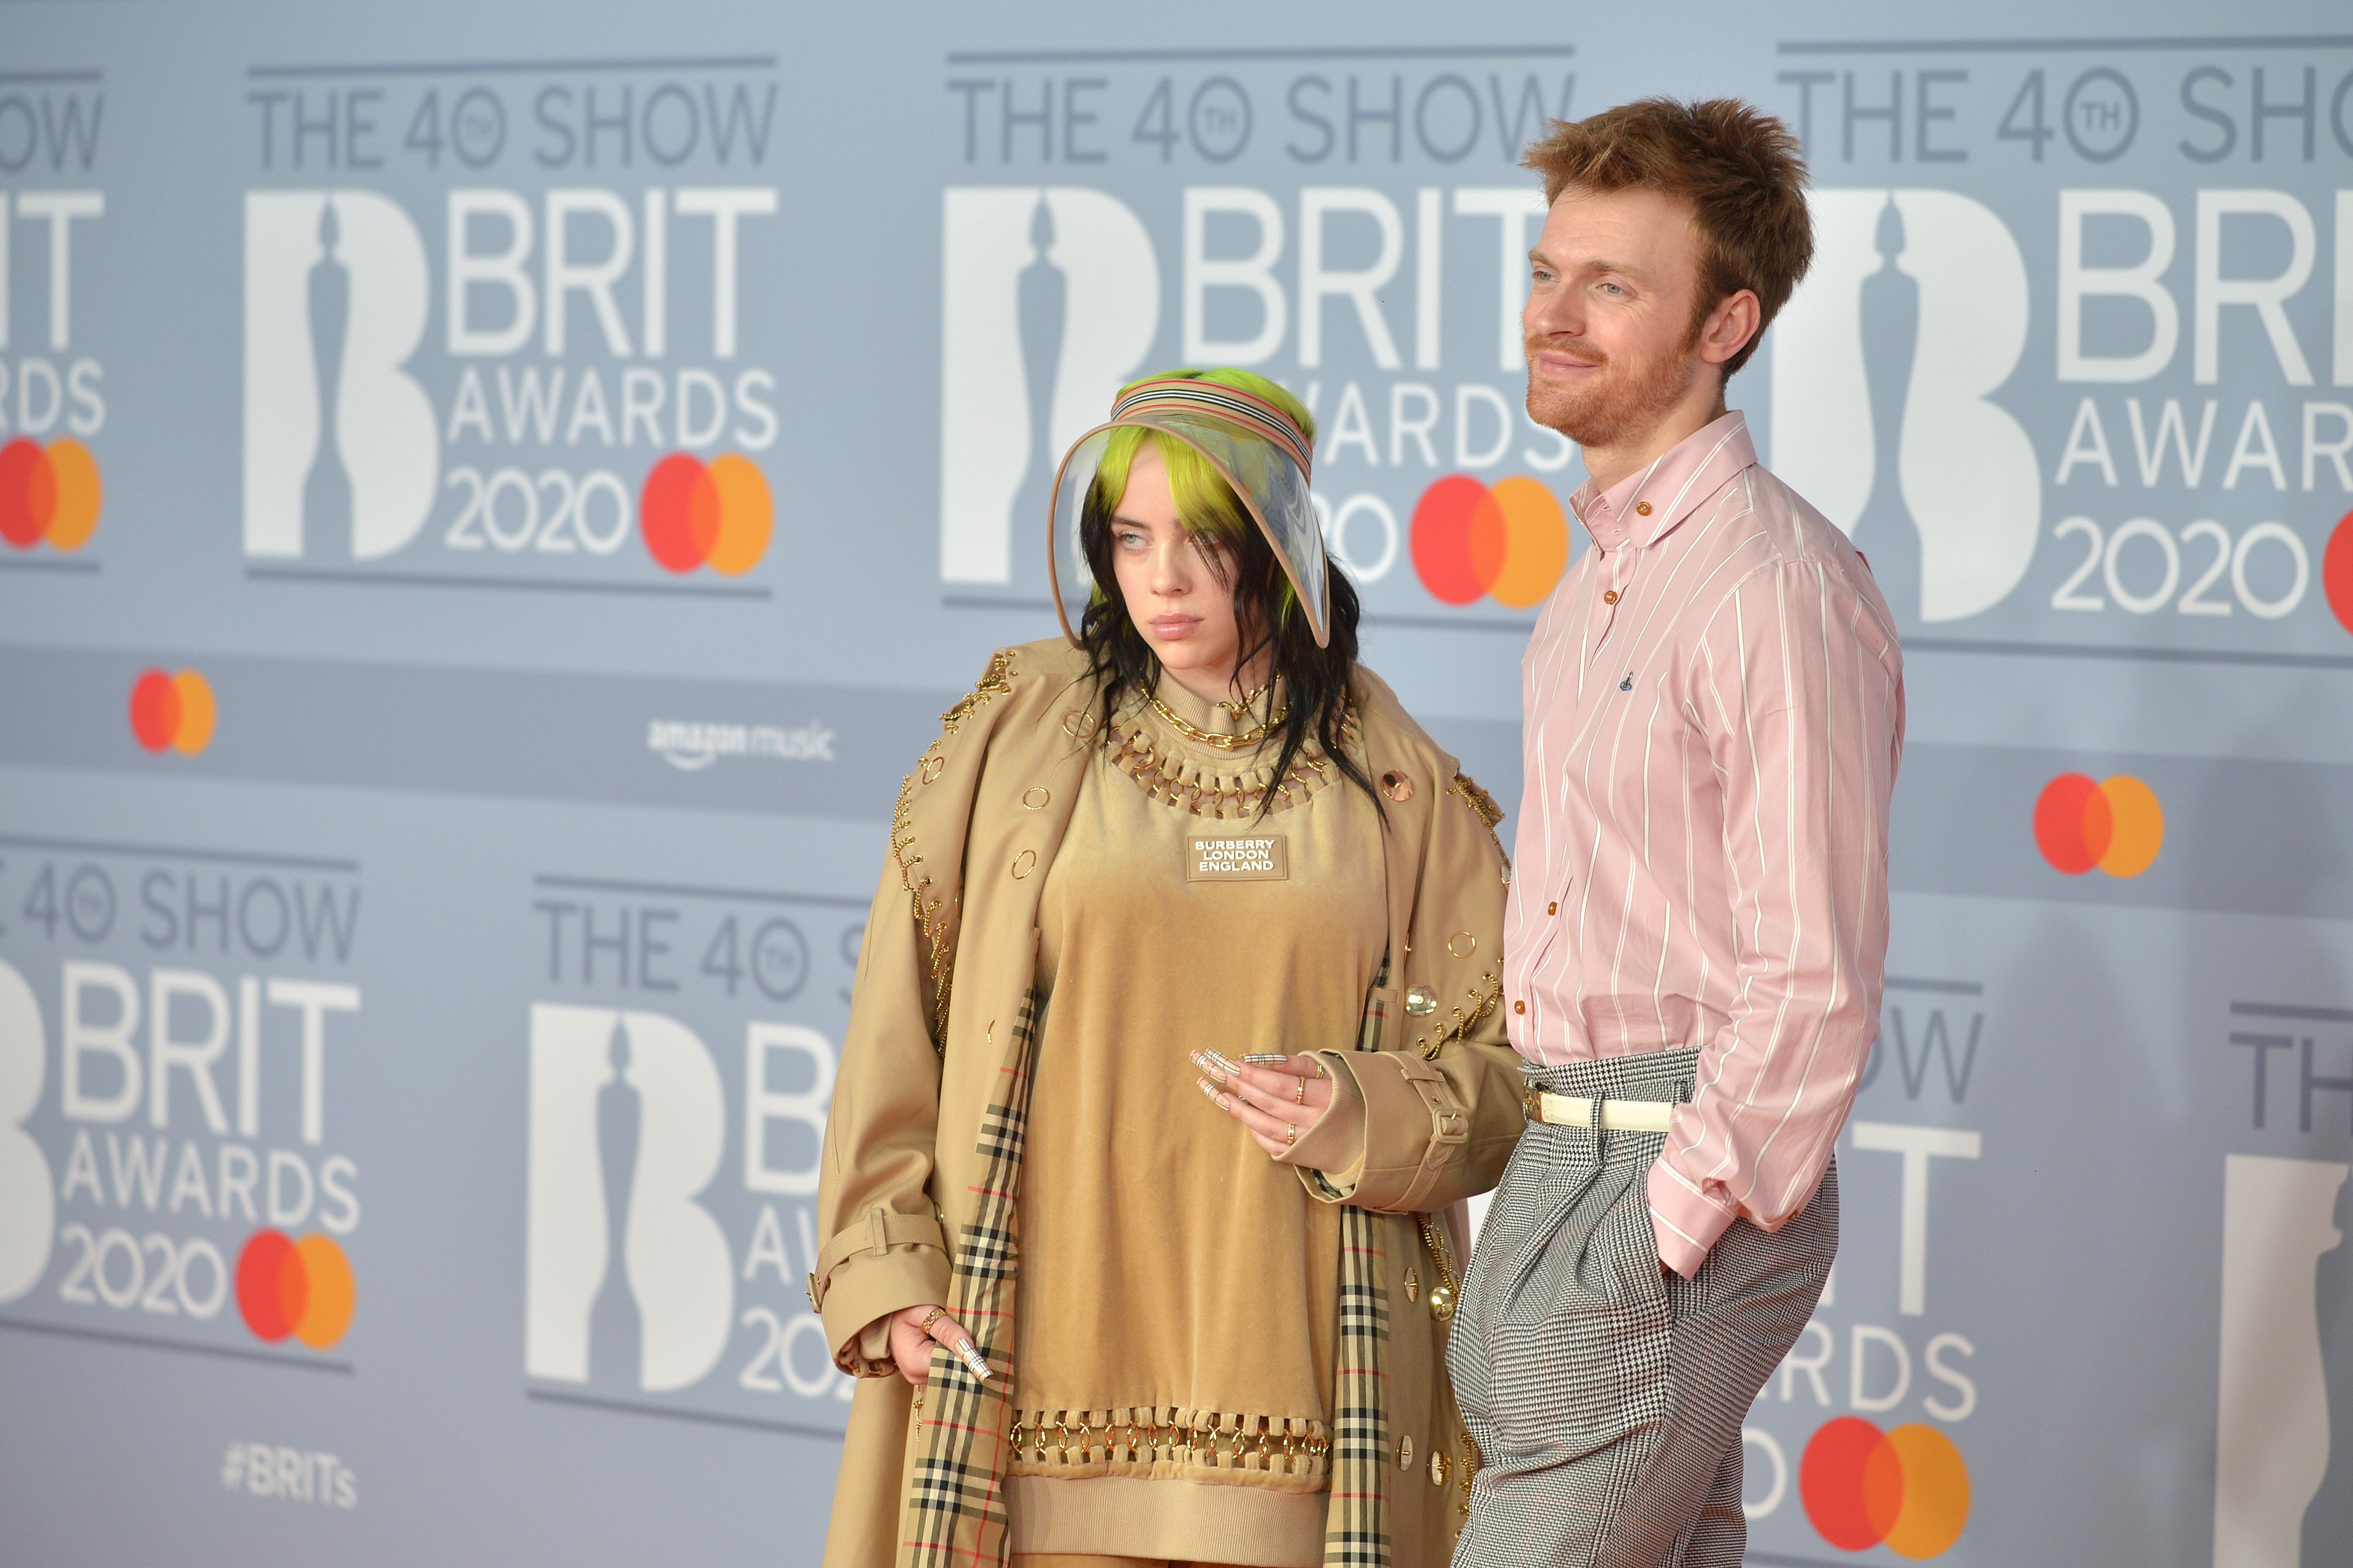 Billie Eilish and Finneas O'Connell attend The BRIT Awards 2020